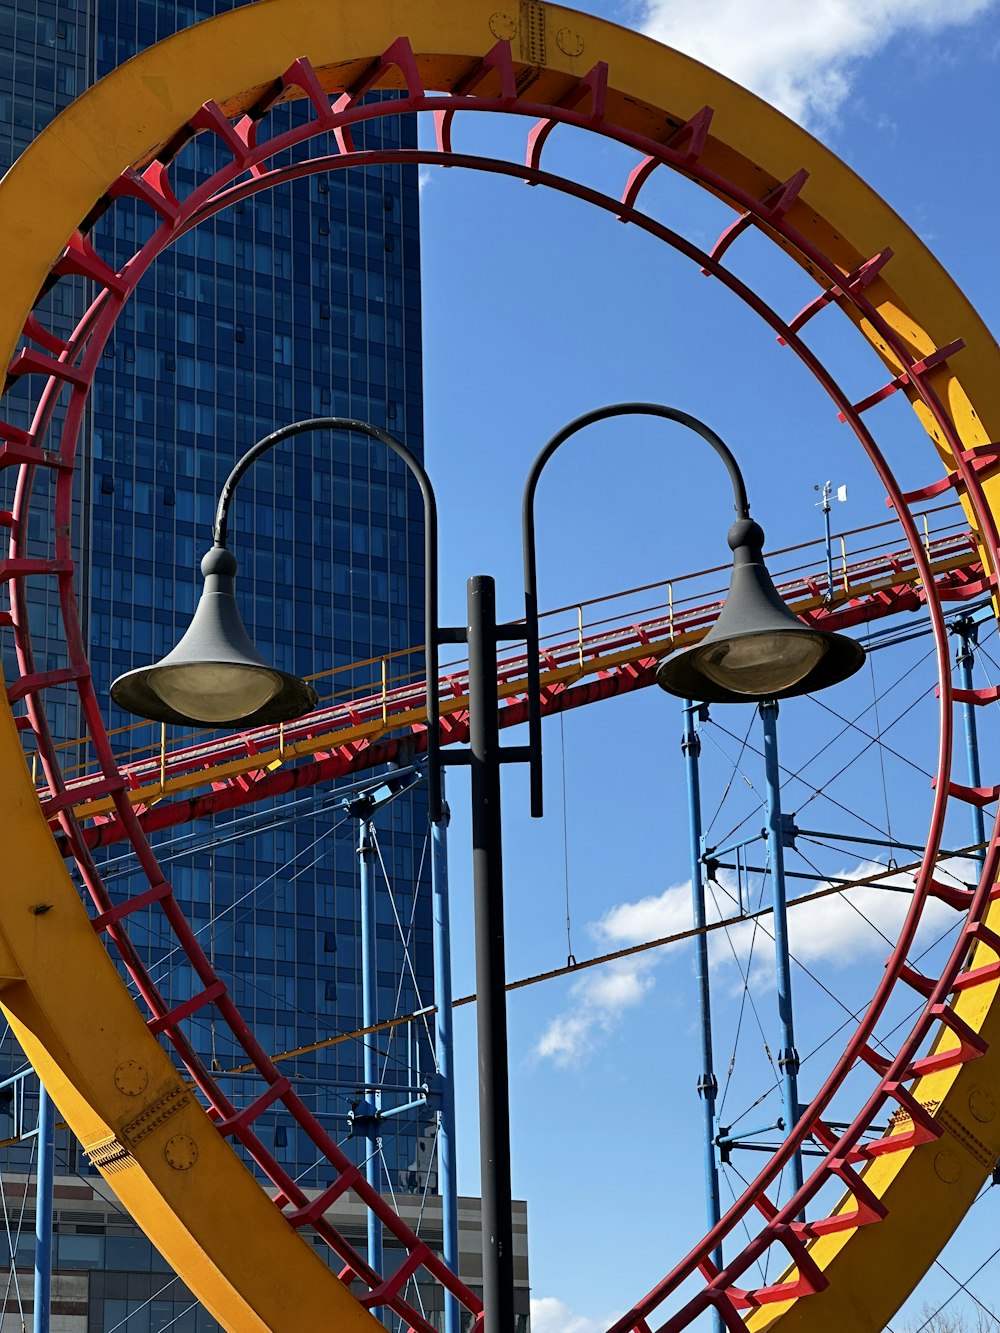 a giant ferris wheel in front of a tall building